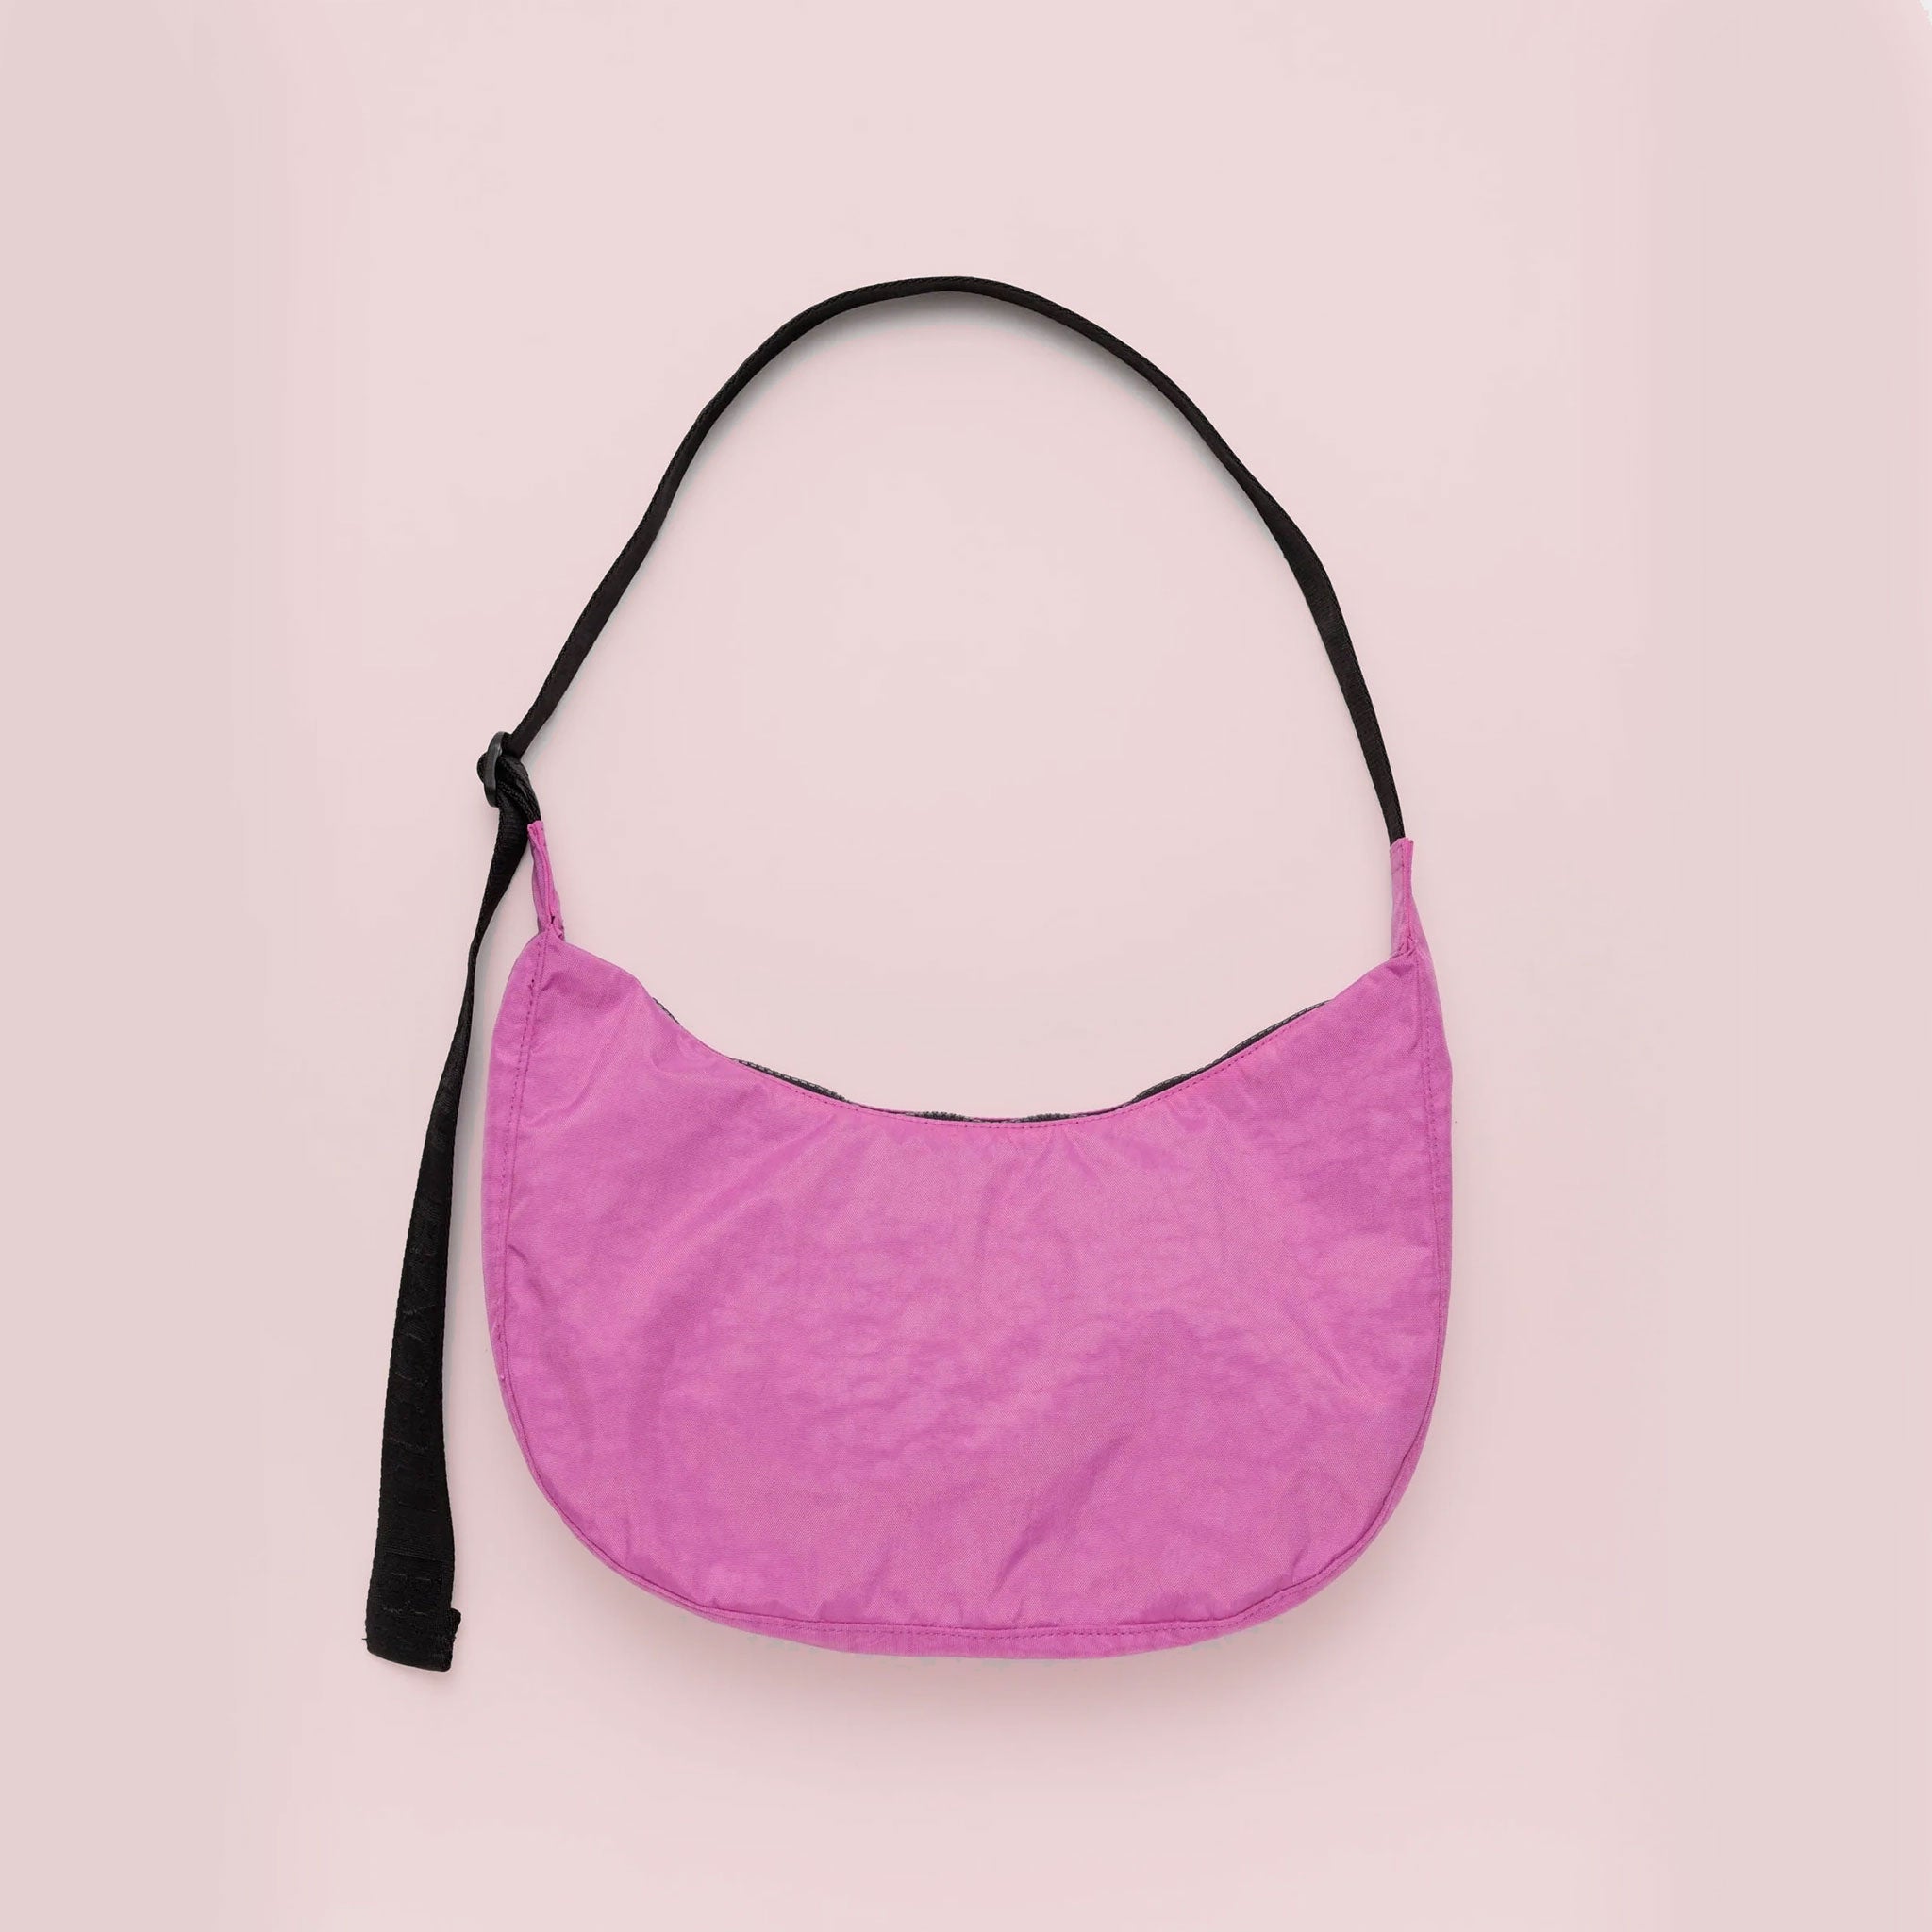 On a pink background is a hot pink crescent shaped nylon handbag with a black strap. 